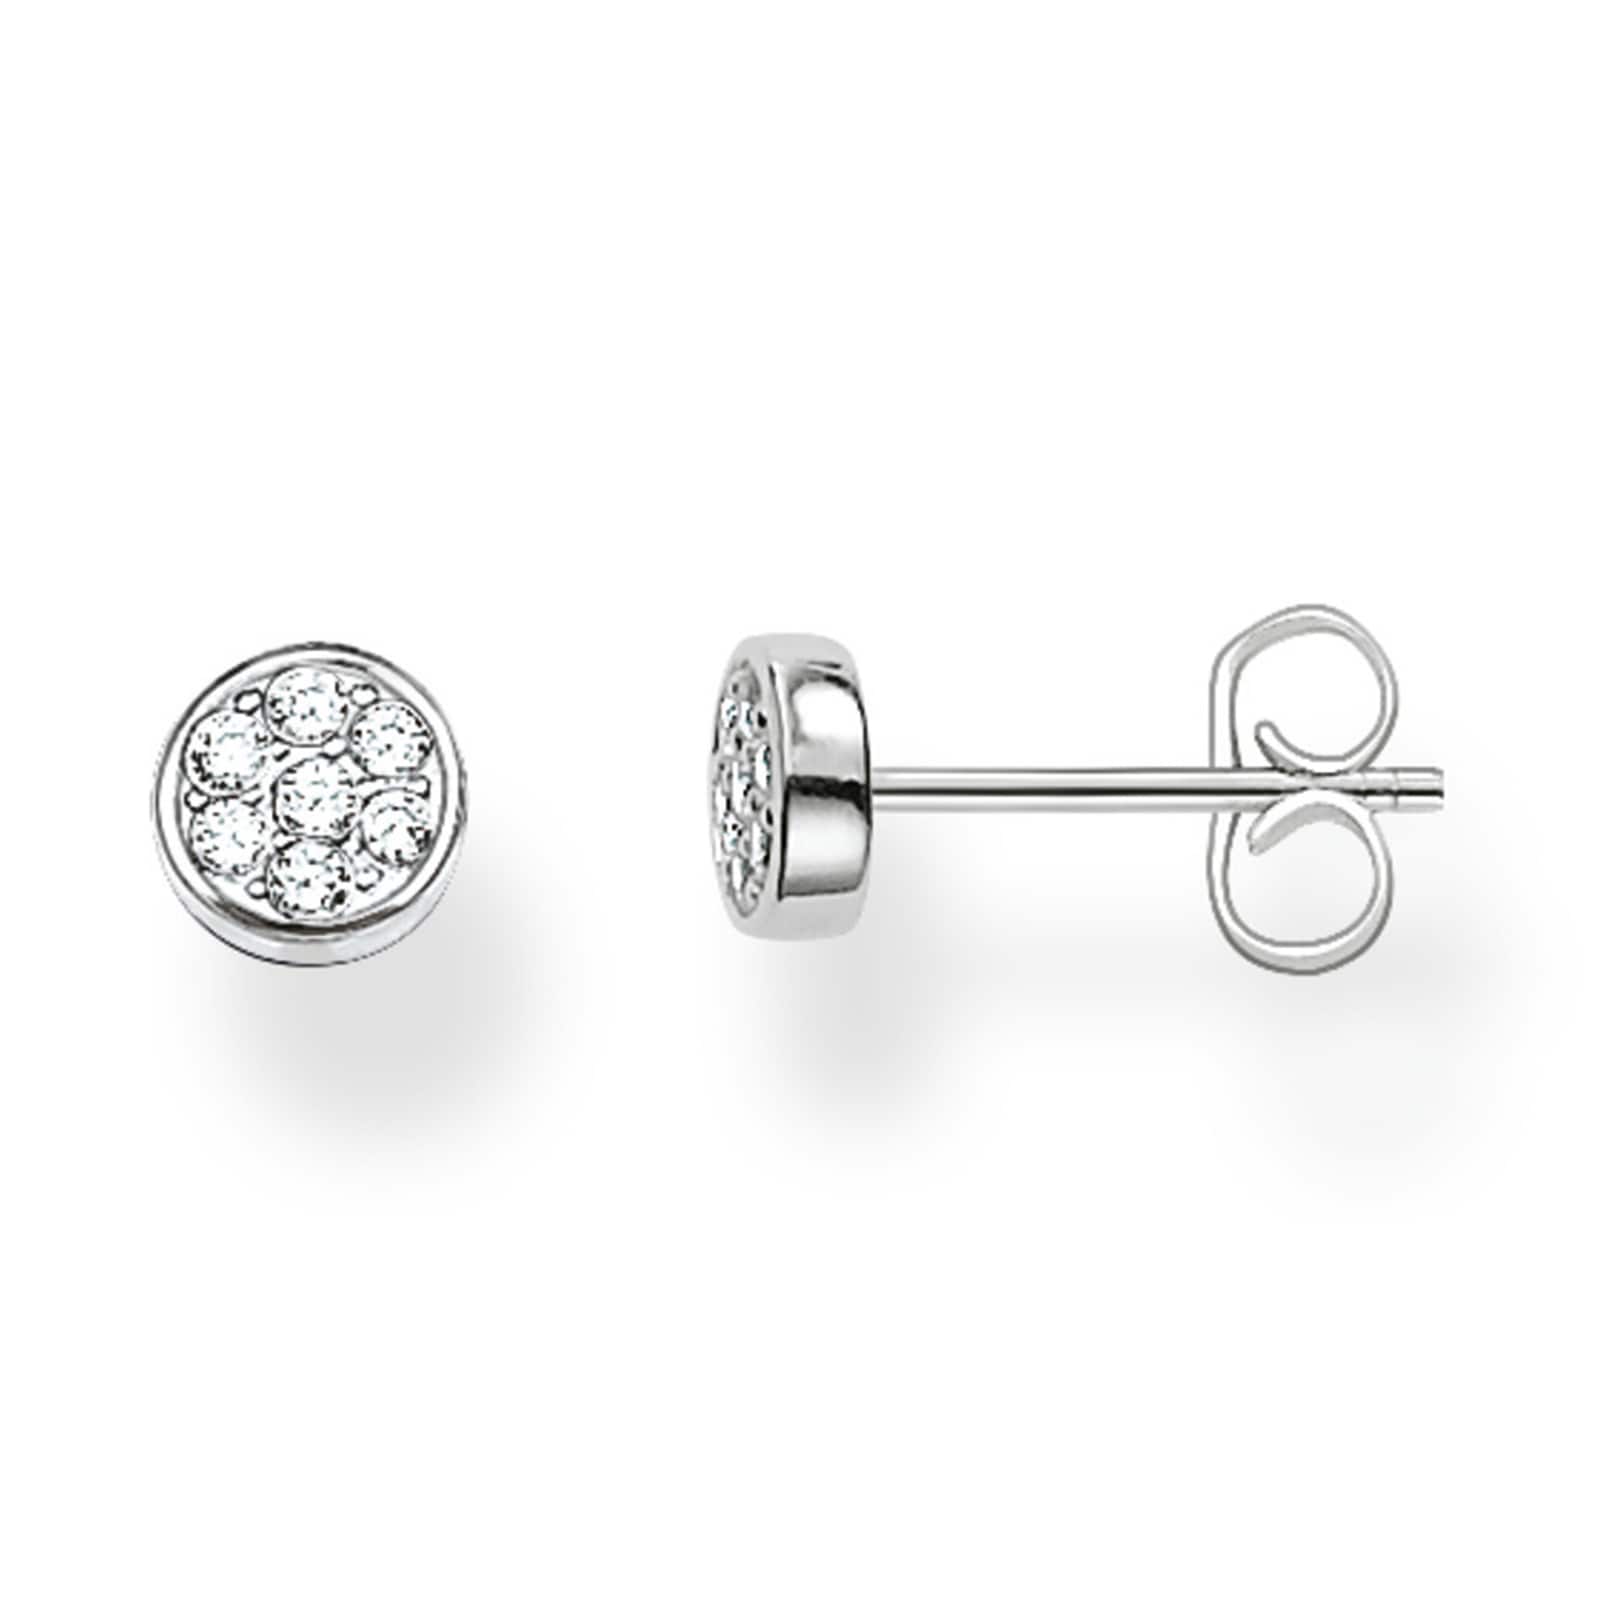 Sterling Silver White Pave Stud Earrings